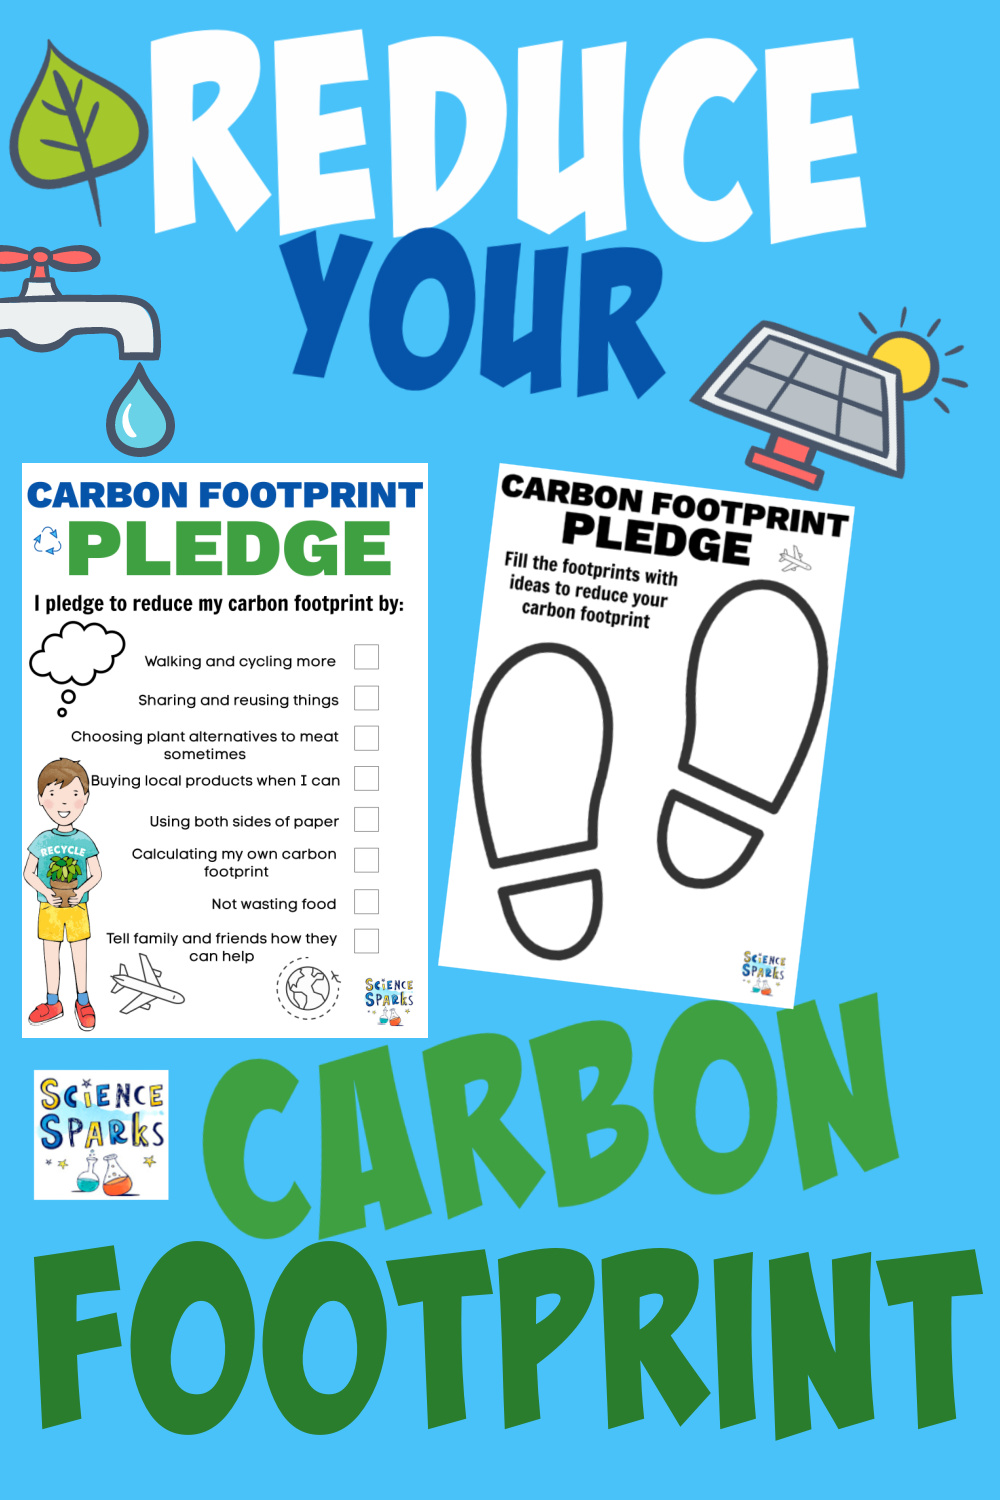 Image of worksheets for helping children think about hoe to reduce their carbon footprint.